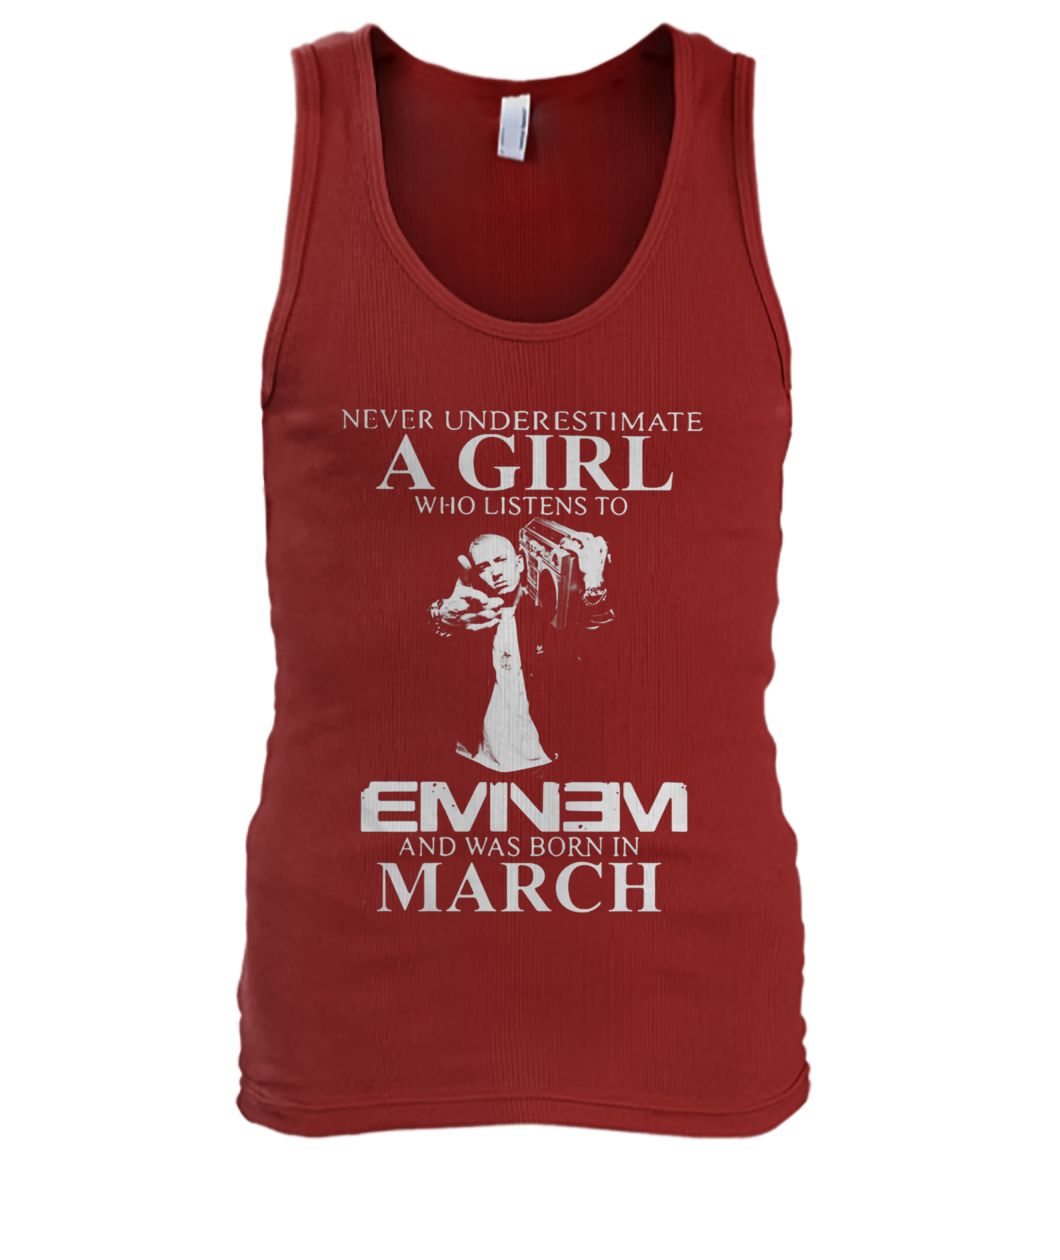 Never underestimate a girl who listens to eminem and was born in march men's tank top